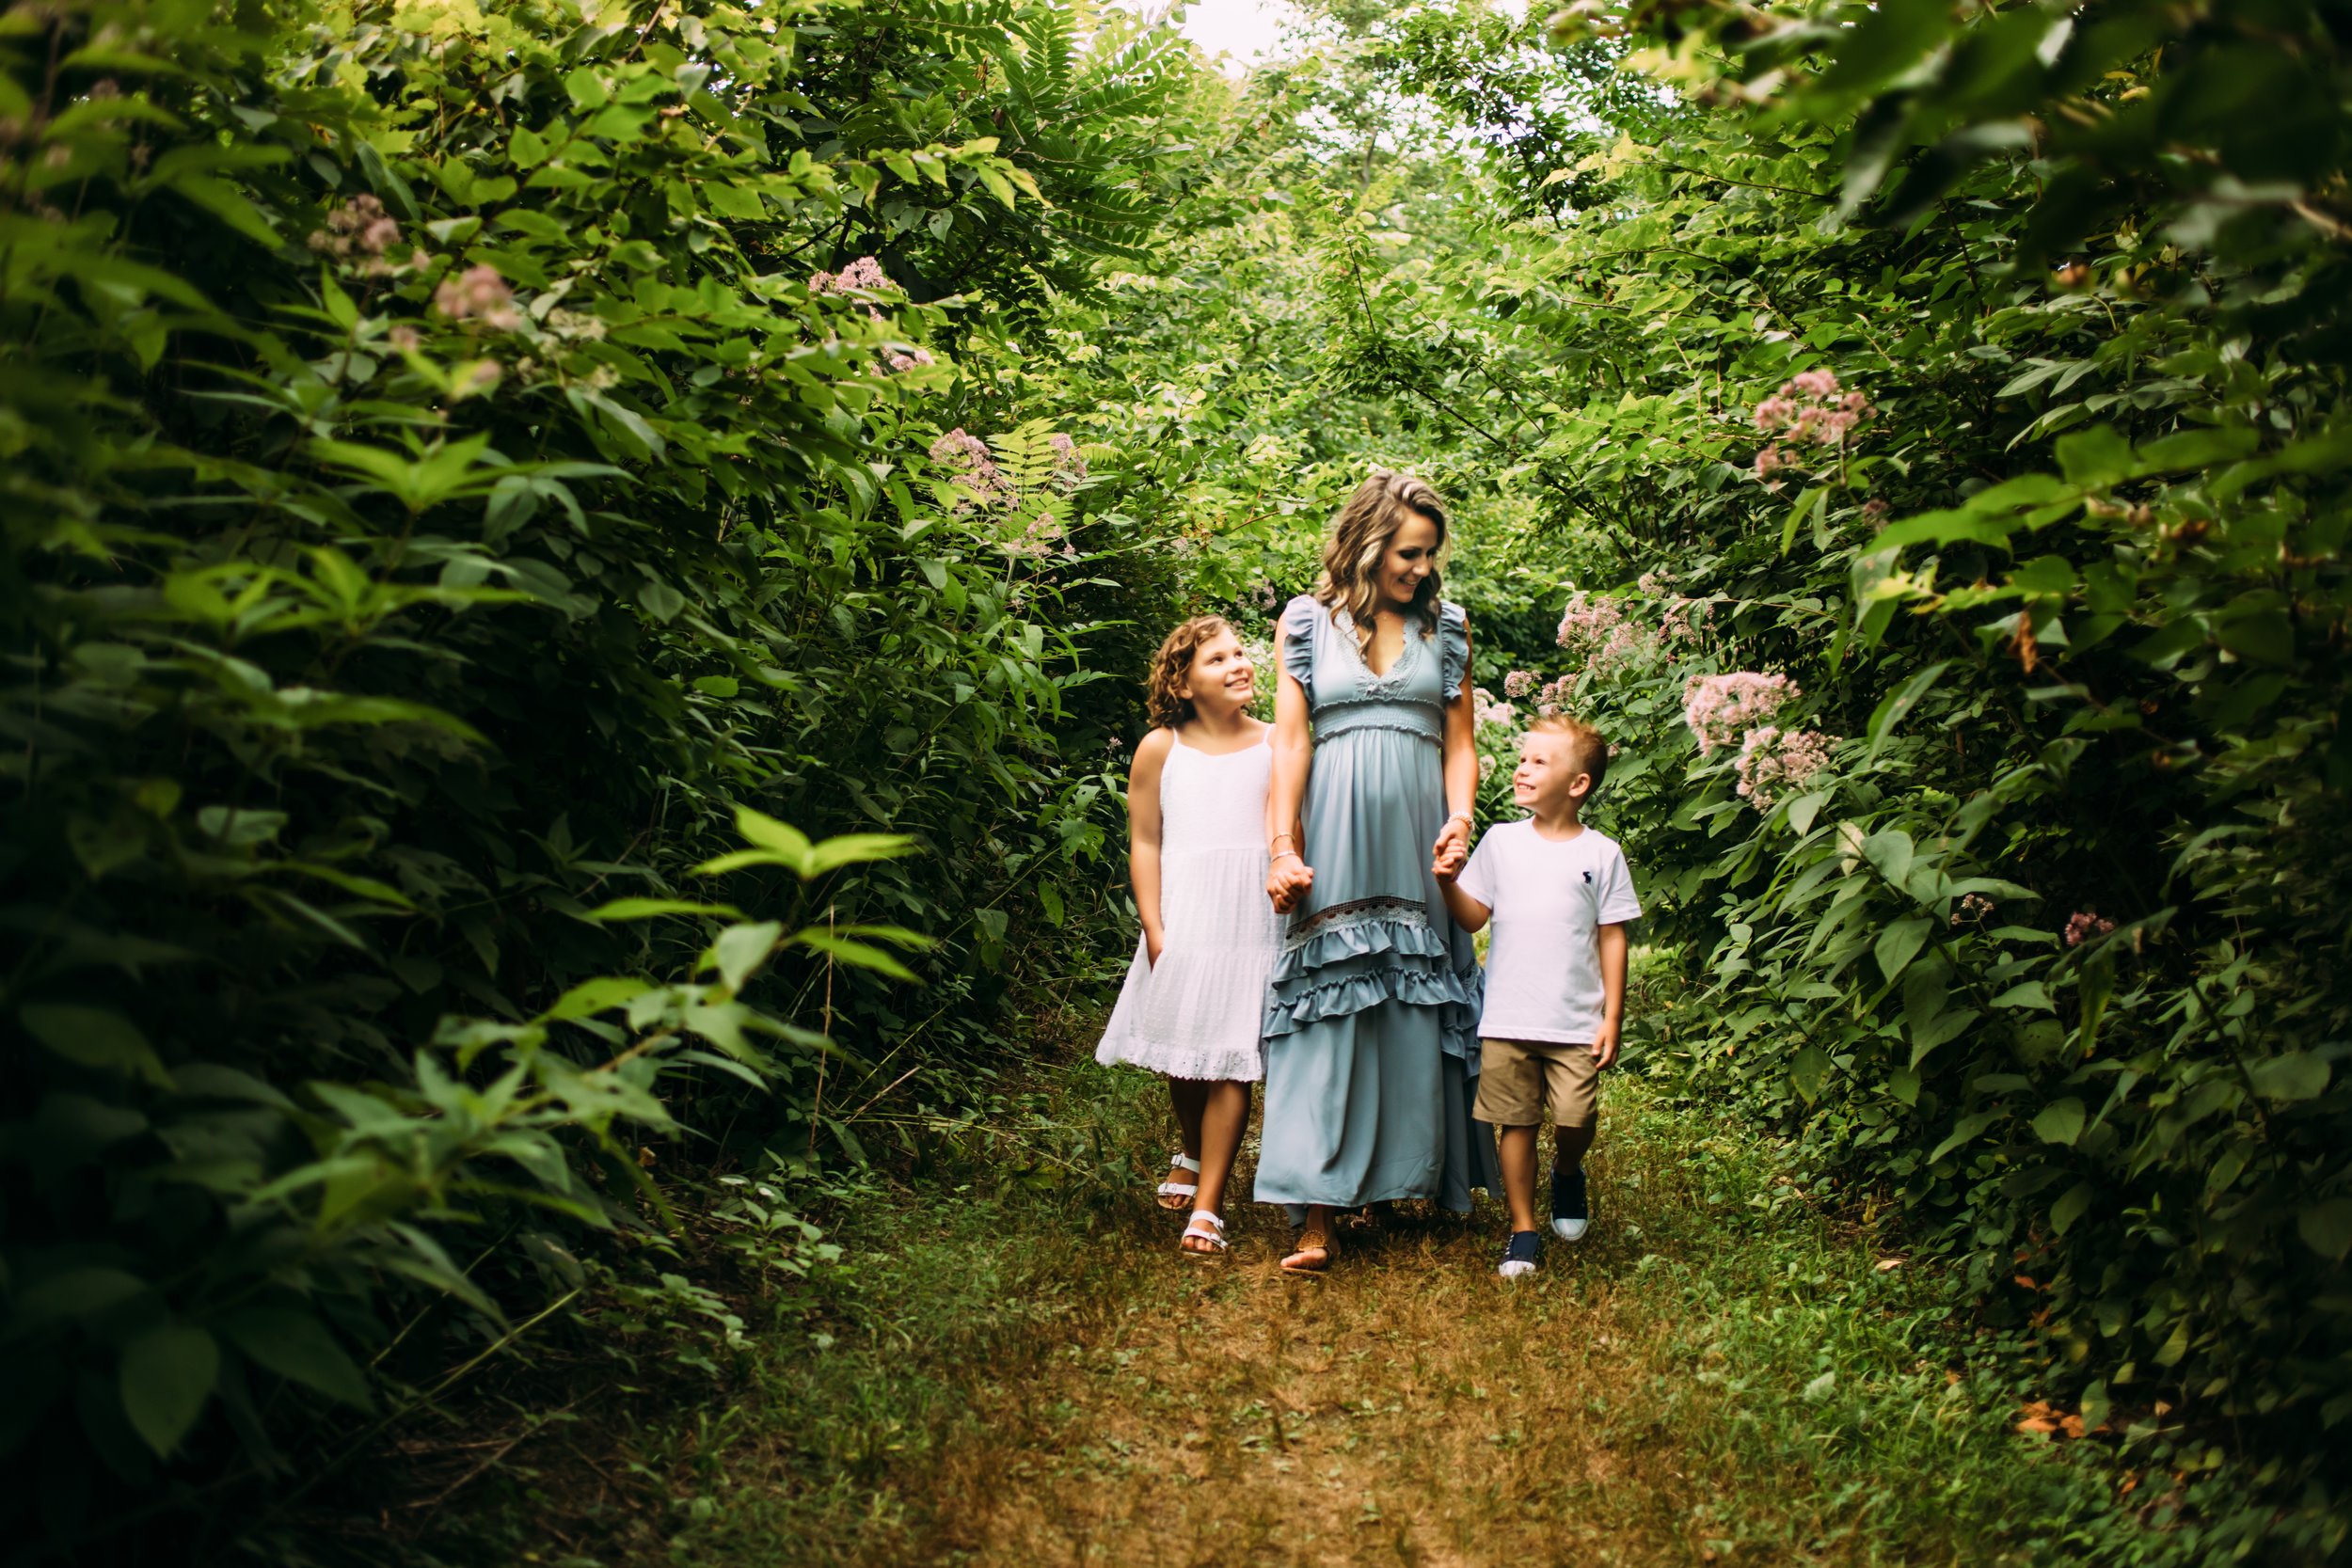  Dynamic family photography of a mother and her children in a green tree hideout by Teala Ward Photography. Illinois families #motherhood #mommapics #TealaWardPhotography #TealaWardFamilies #IllinoisPhotographers #IllinoisFamilyPhotography 